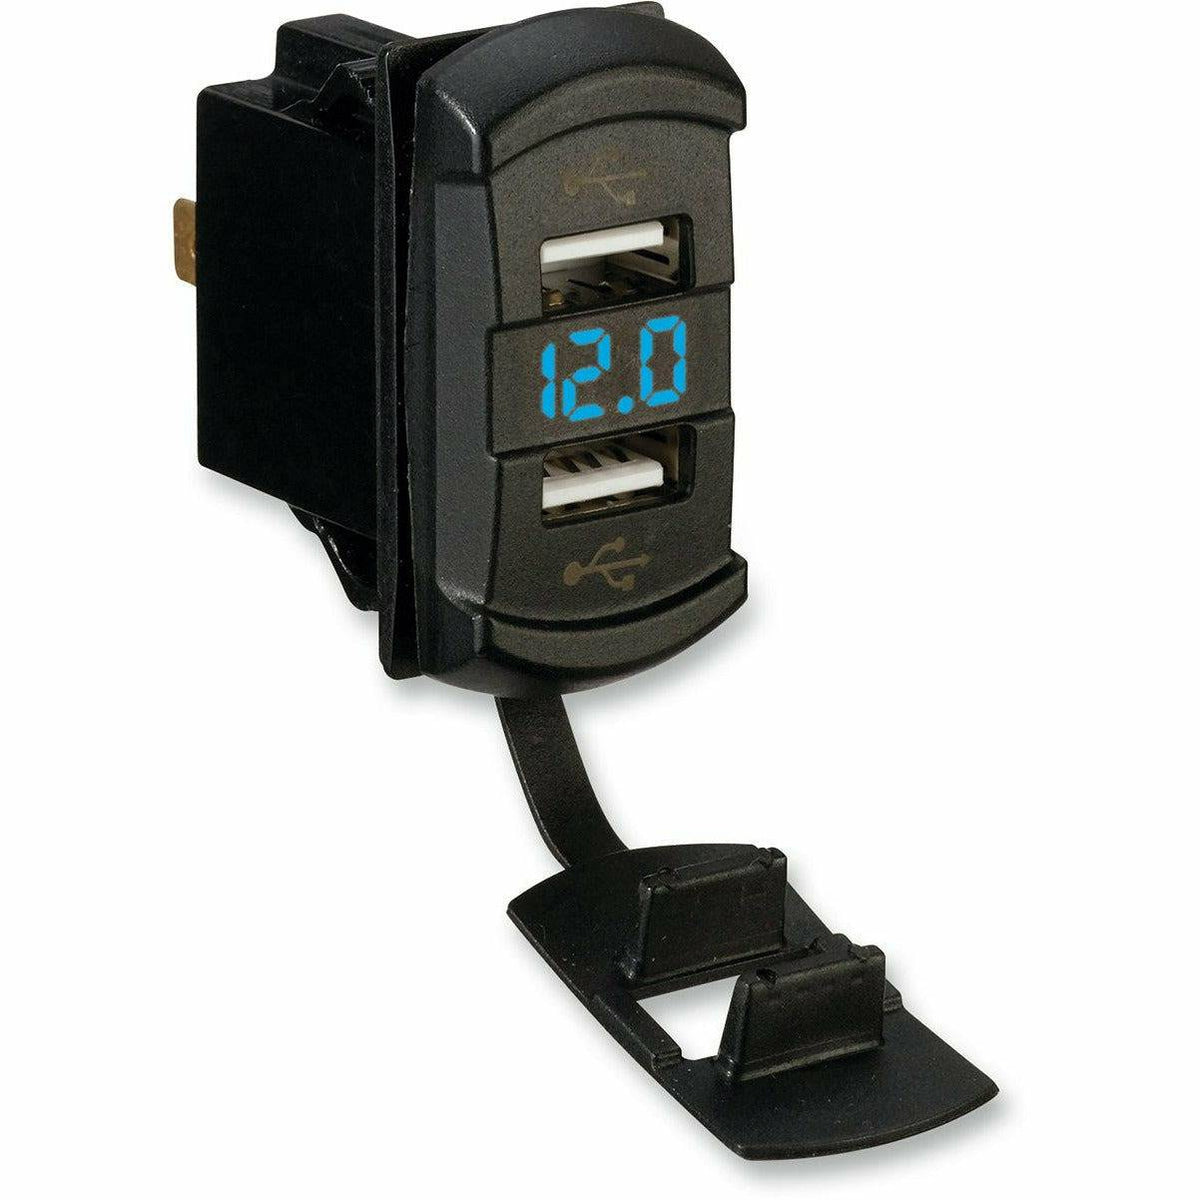 Moose Utilities Dual USB Charger with Voltage Monitor